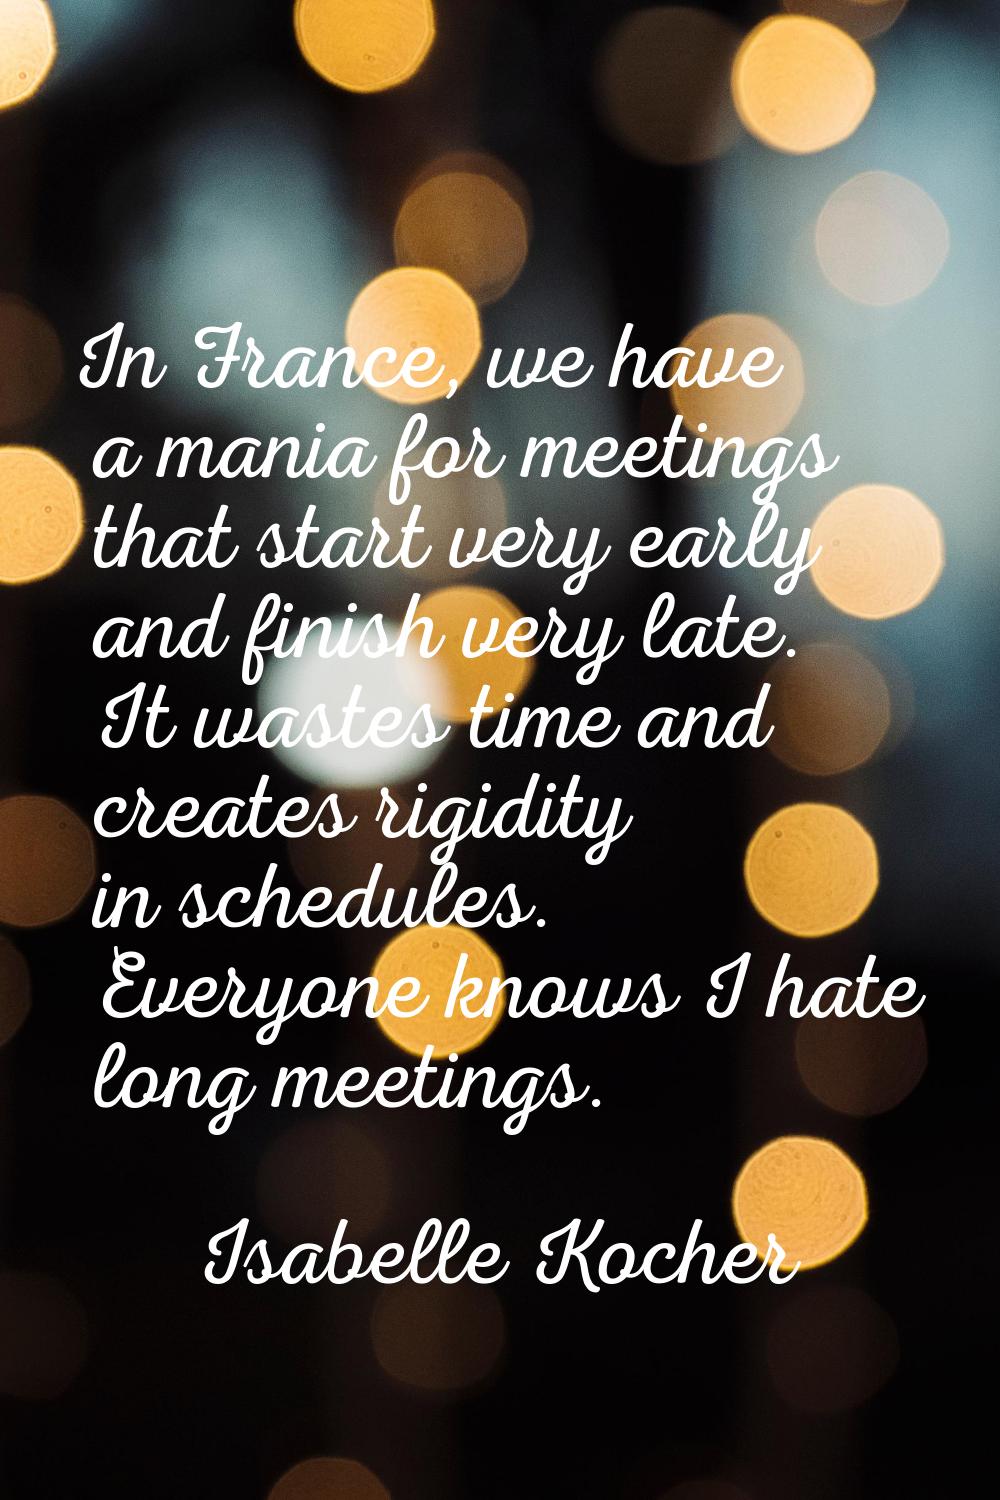 In France, we have a mania for meetings that start very early and finish very late. It wastes time 